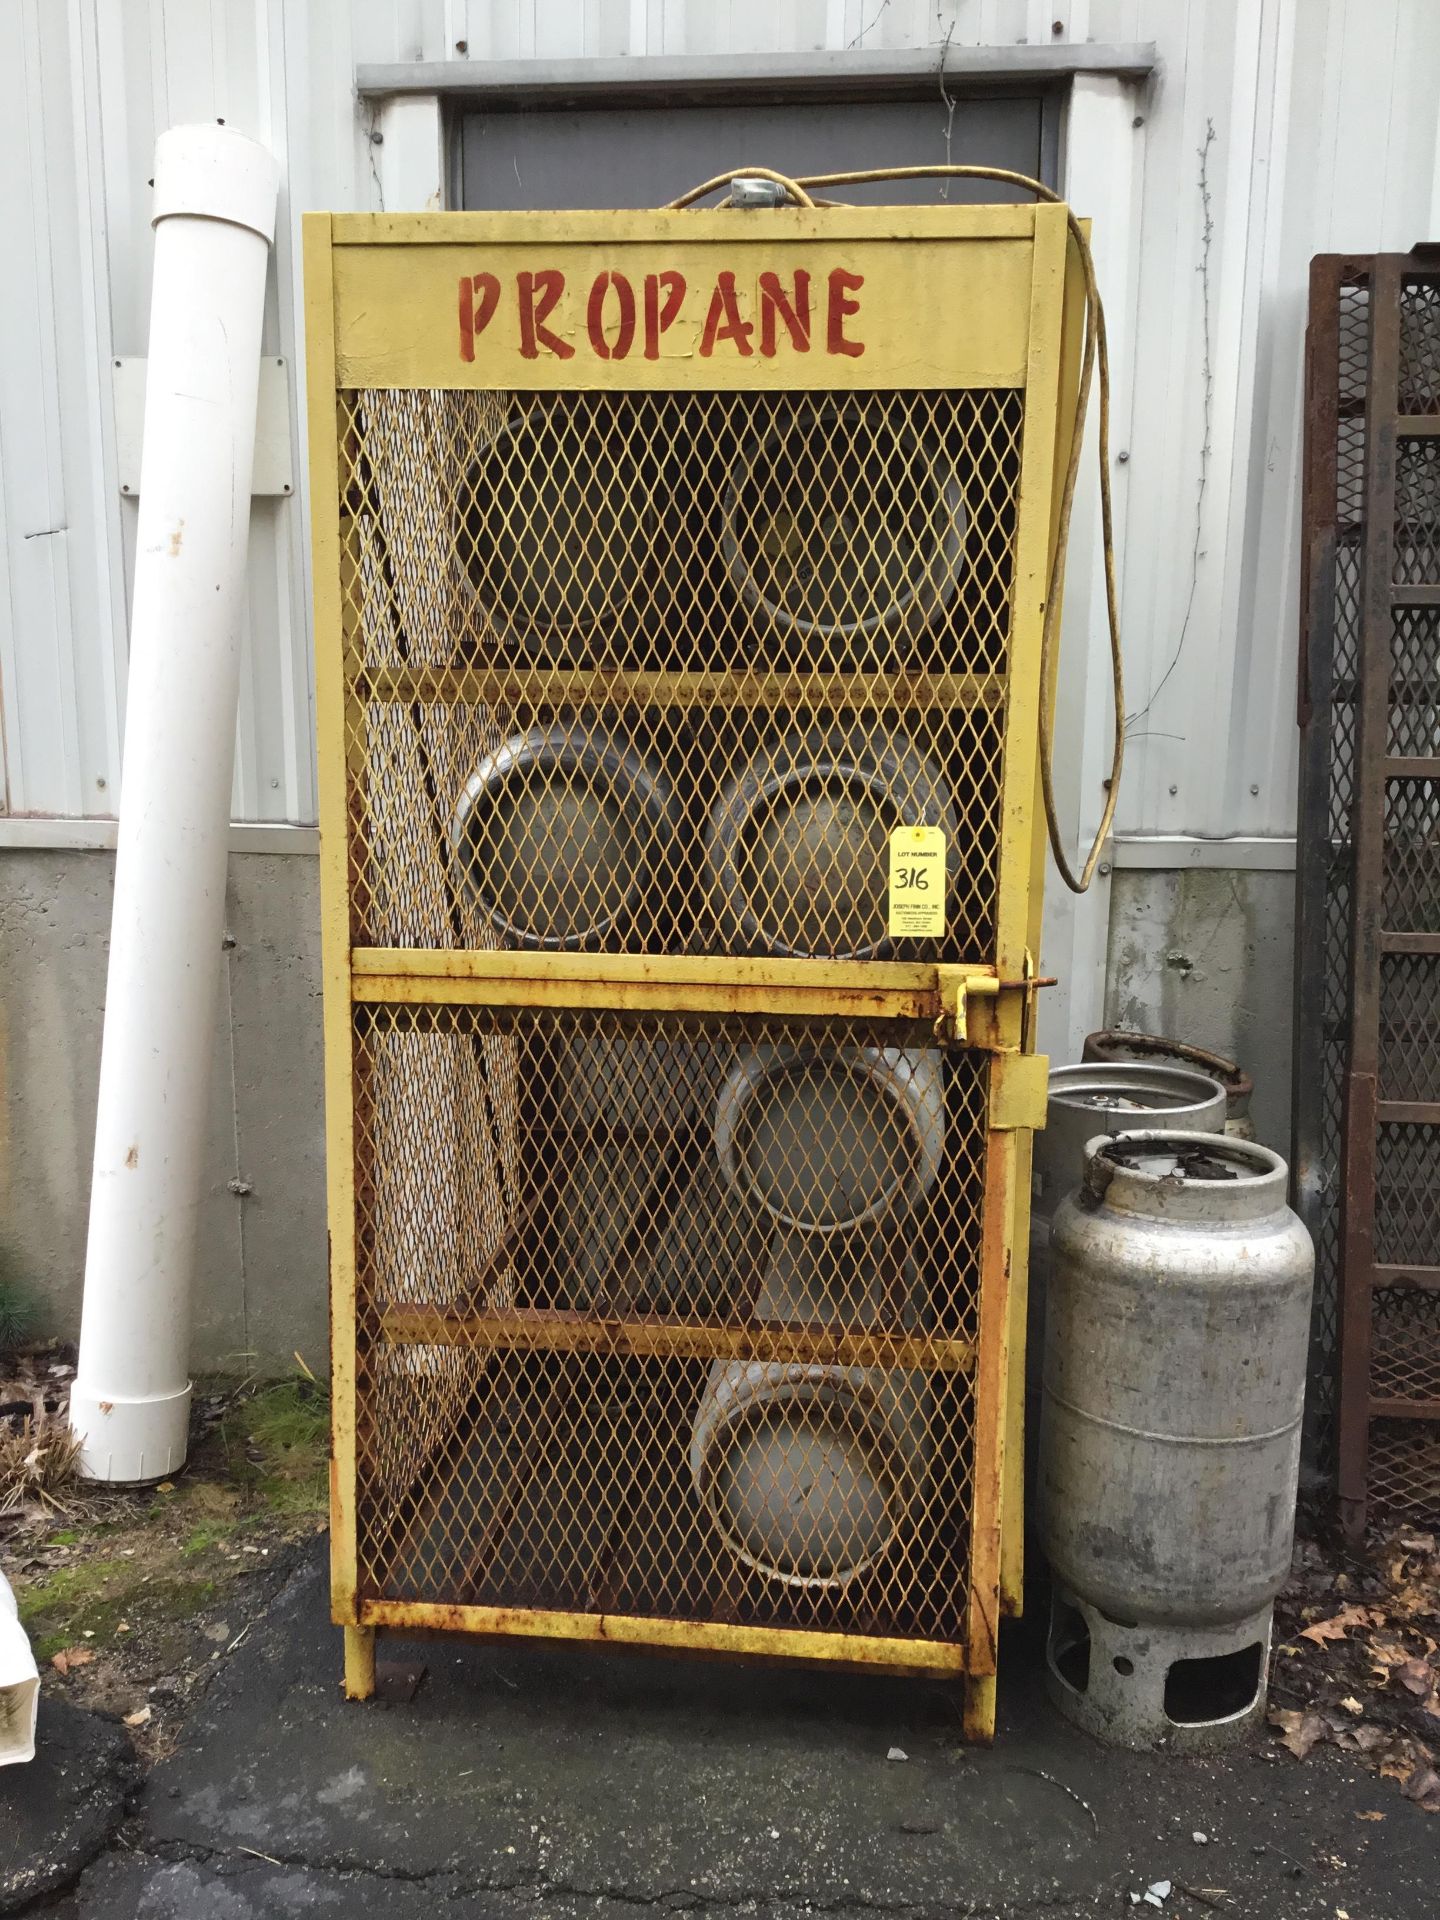 Approximately 8 propane tanks and storage cage